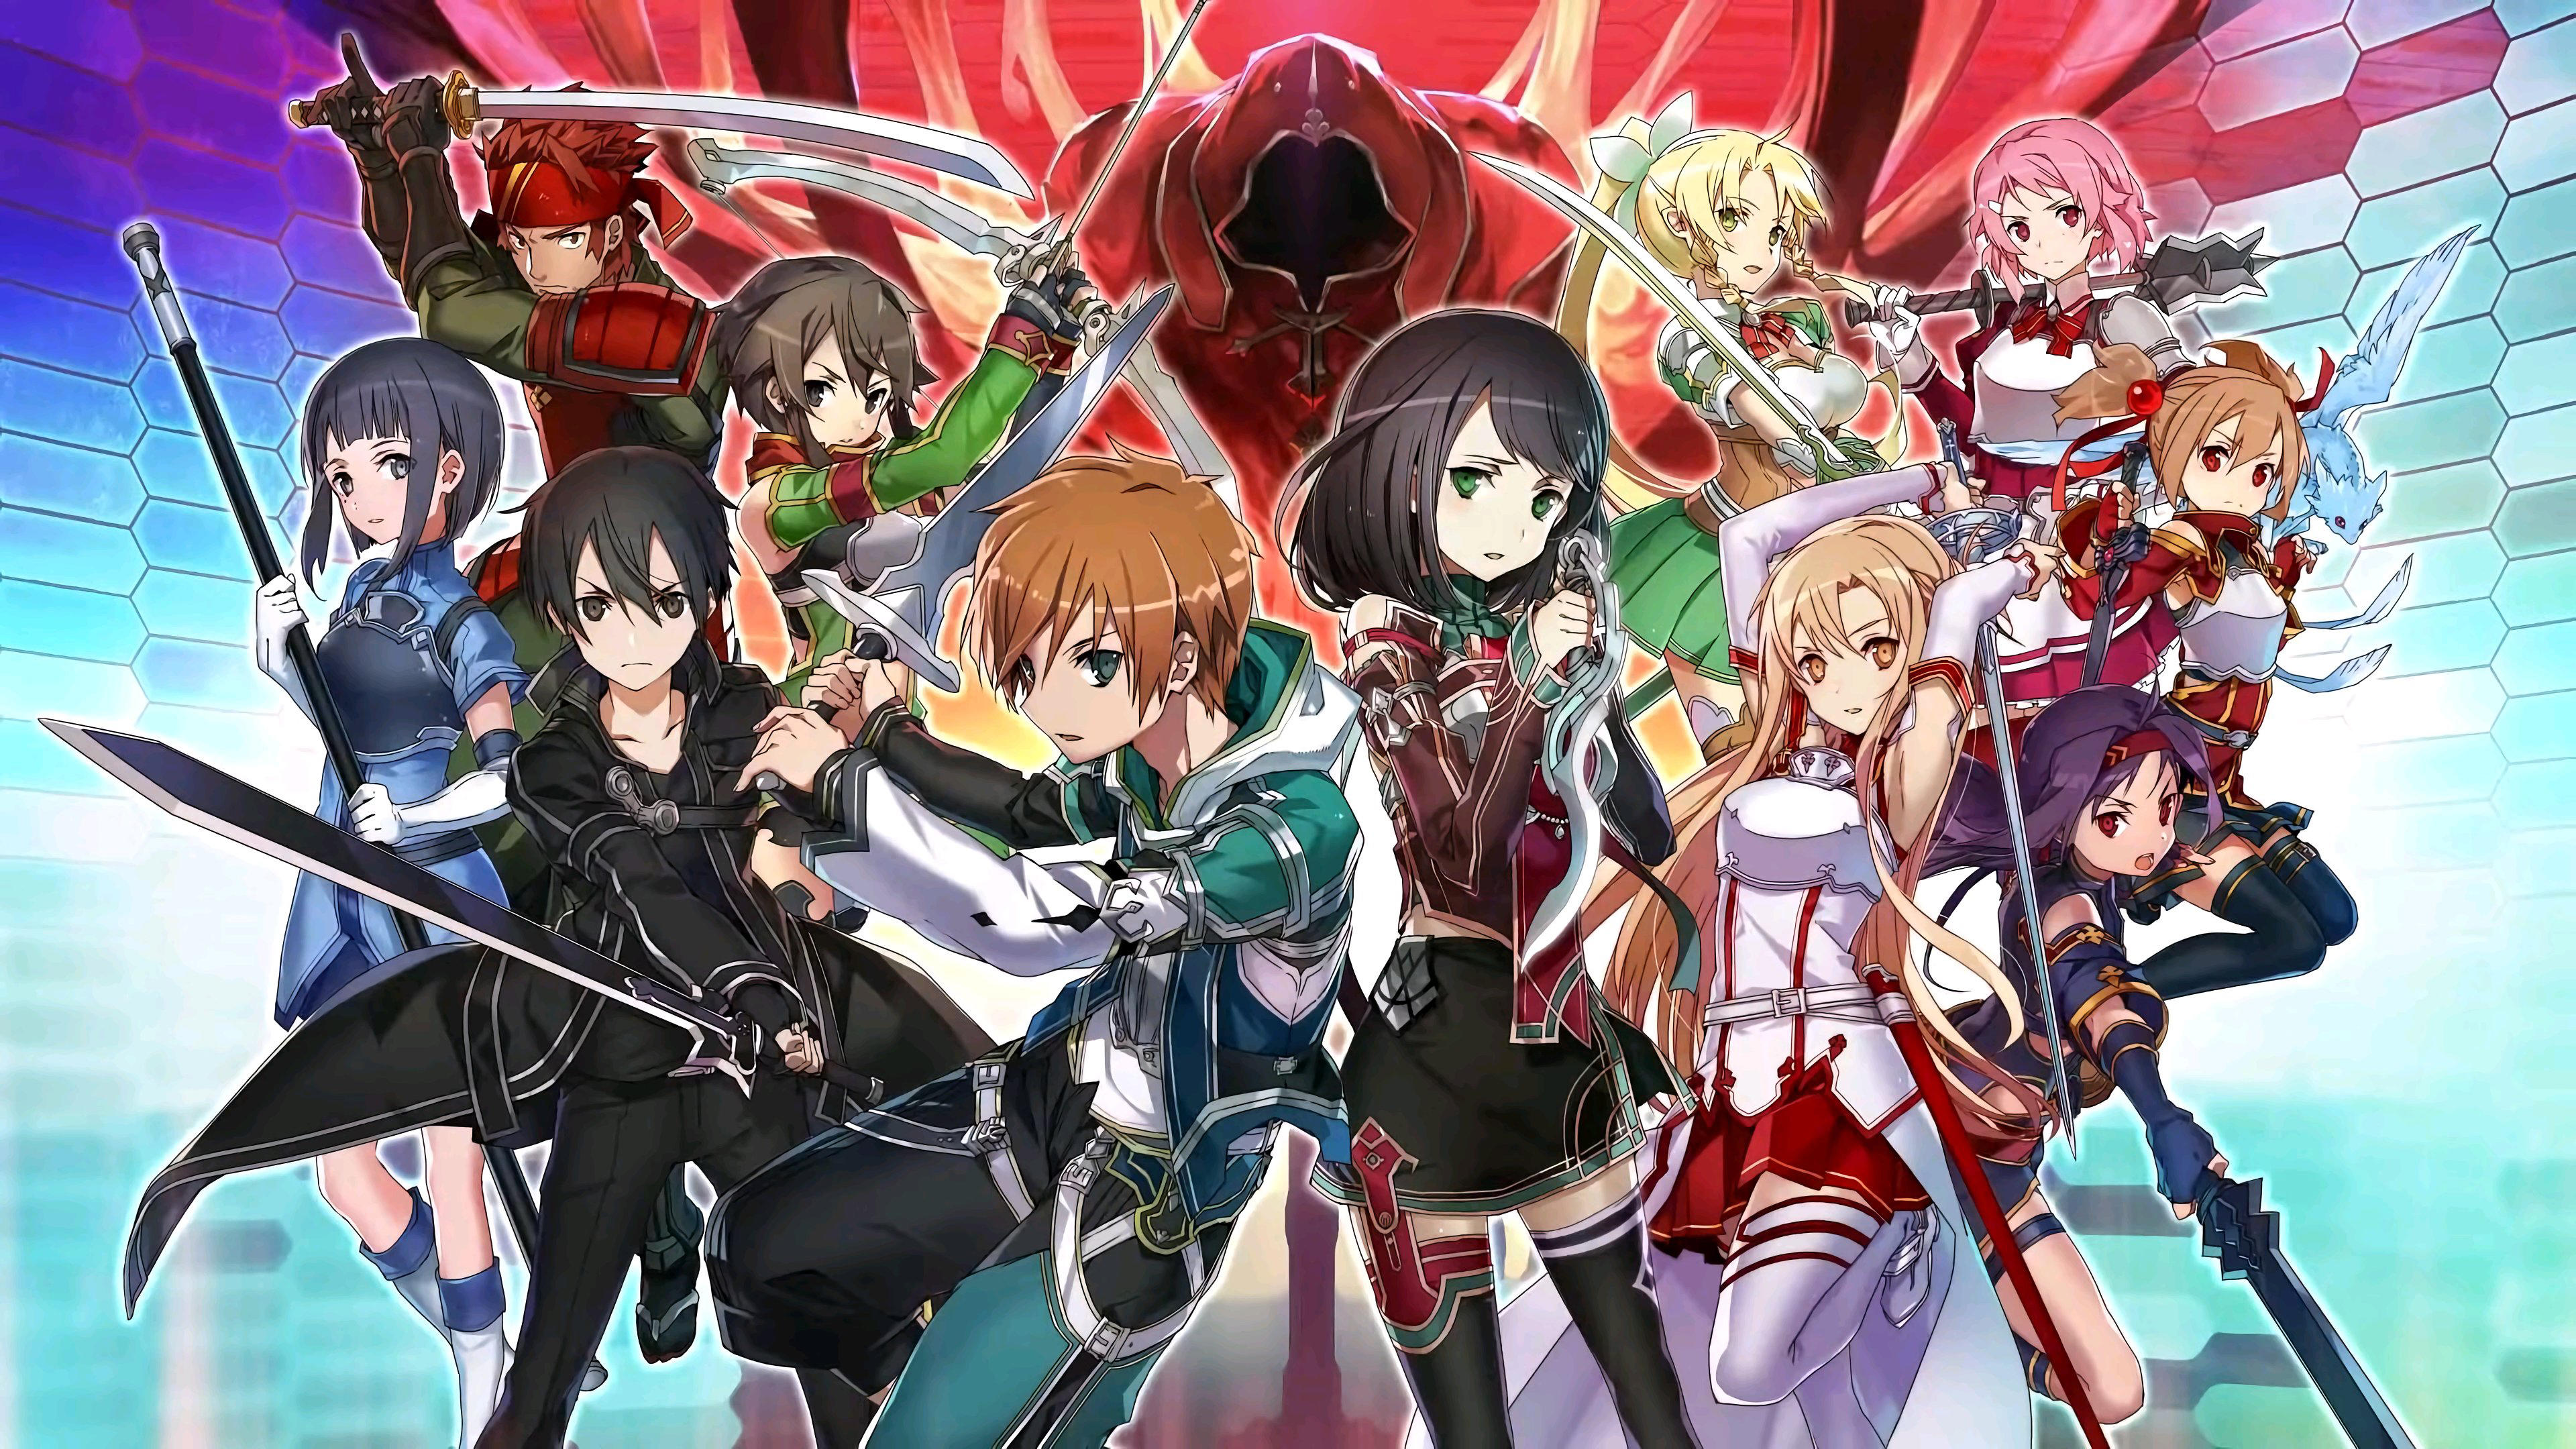 Sao Integral Factor Mmorpg Mobile Android Ios Apk Download For Free-Taptap